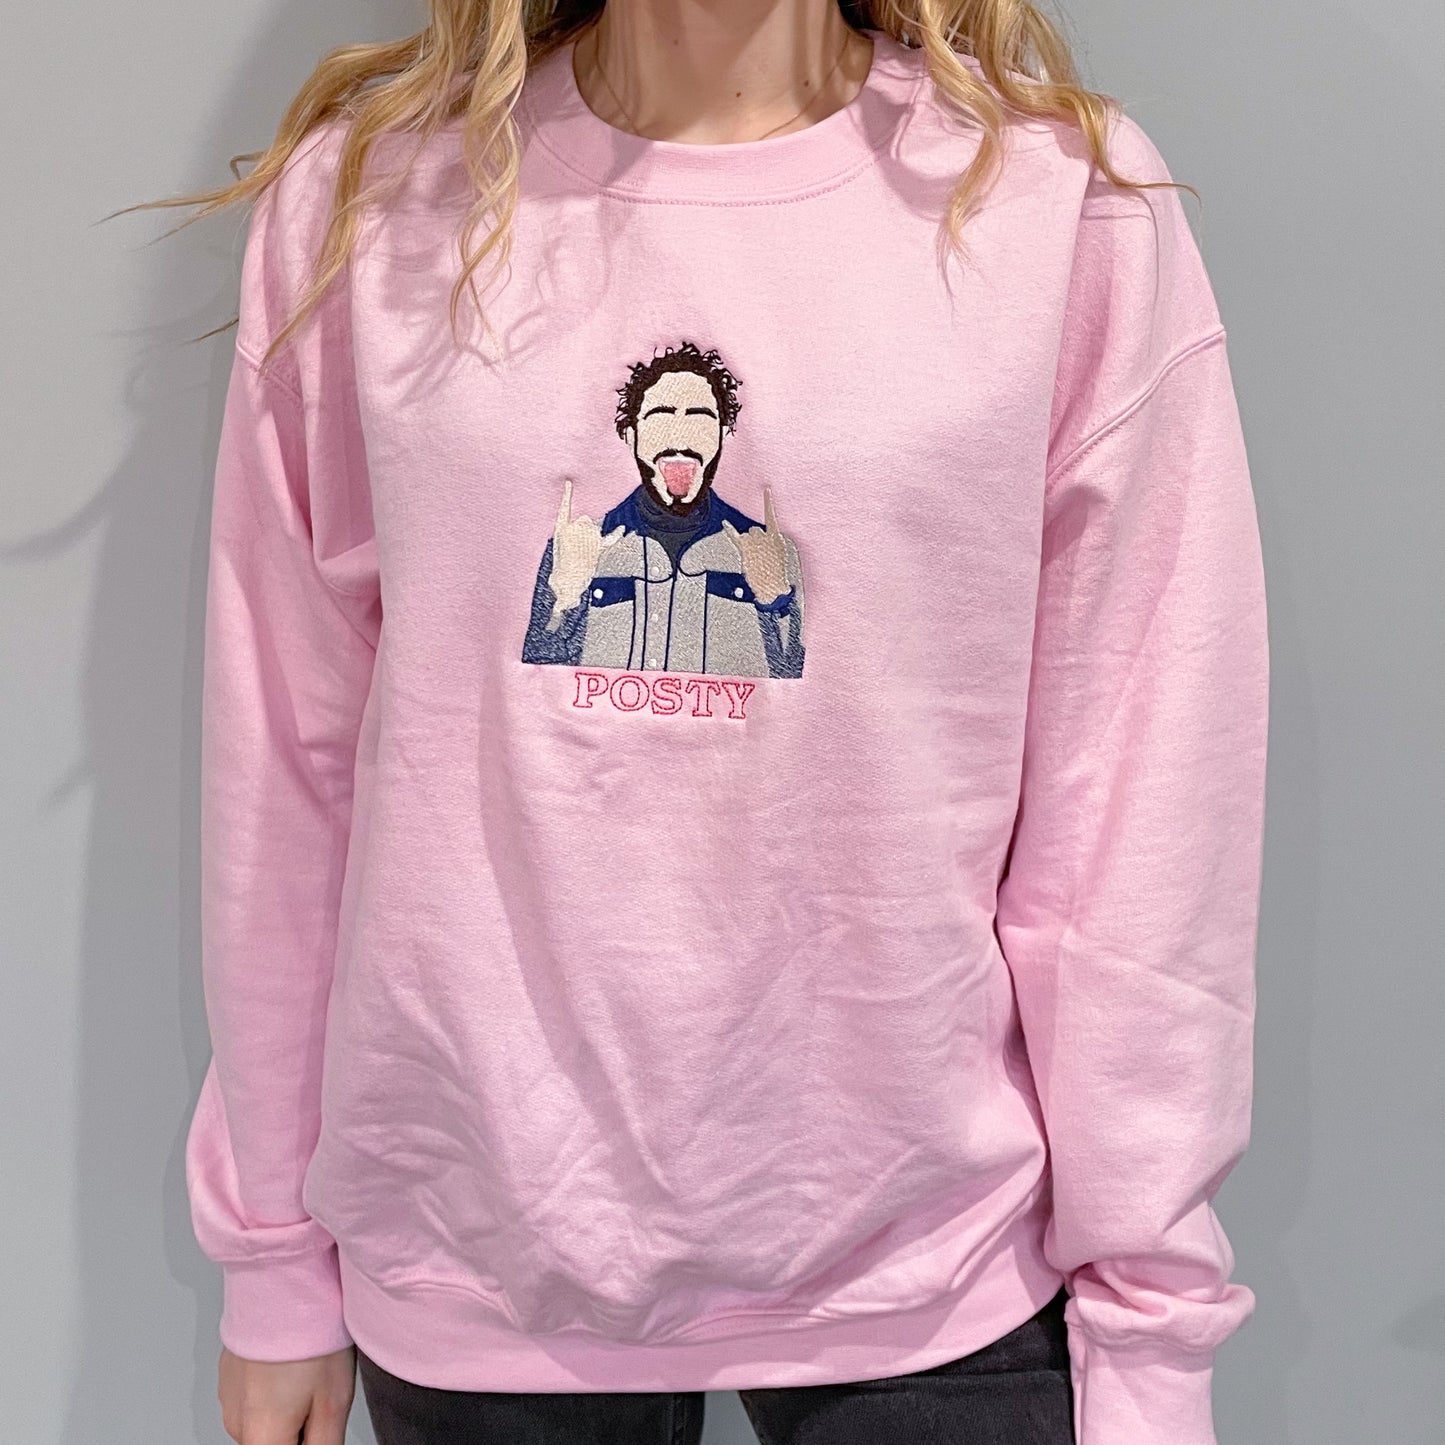 Post Malone Pink Embroidered Crewneck